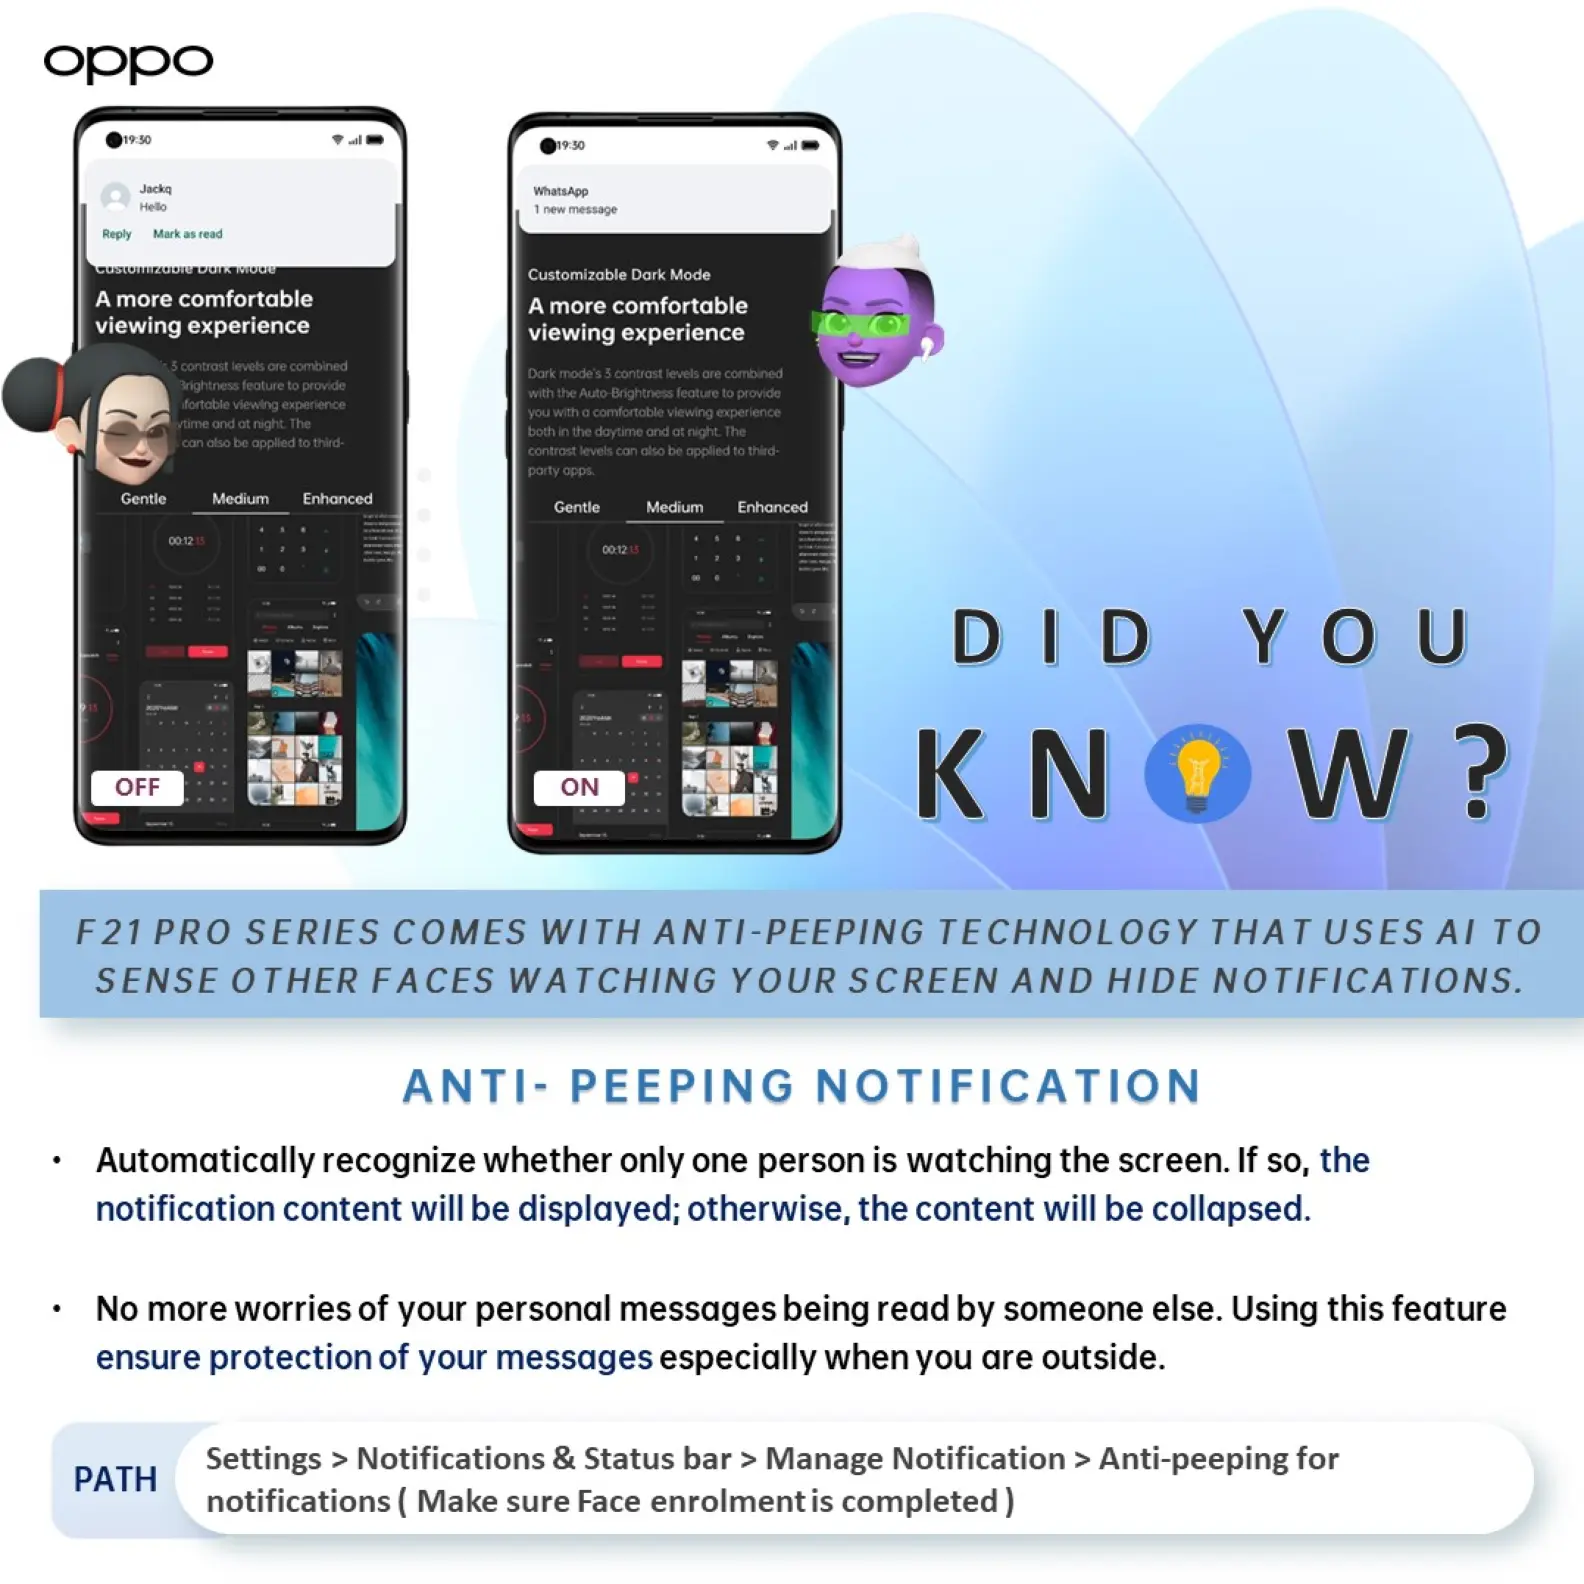 DidYouKnow? About the Anti-peeping Feature in #ColorOS